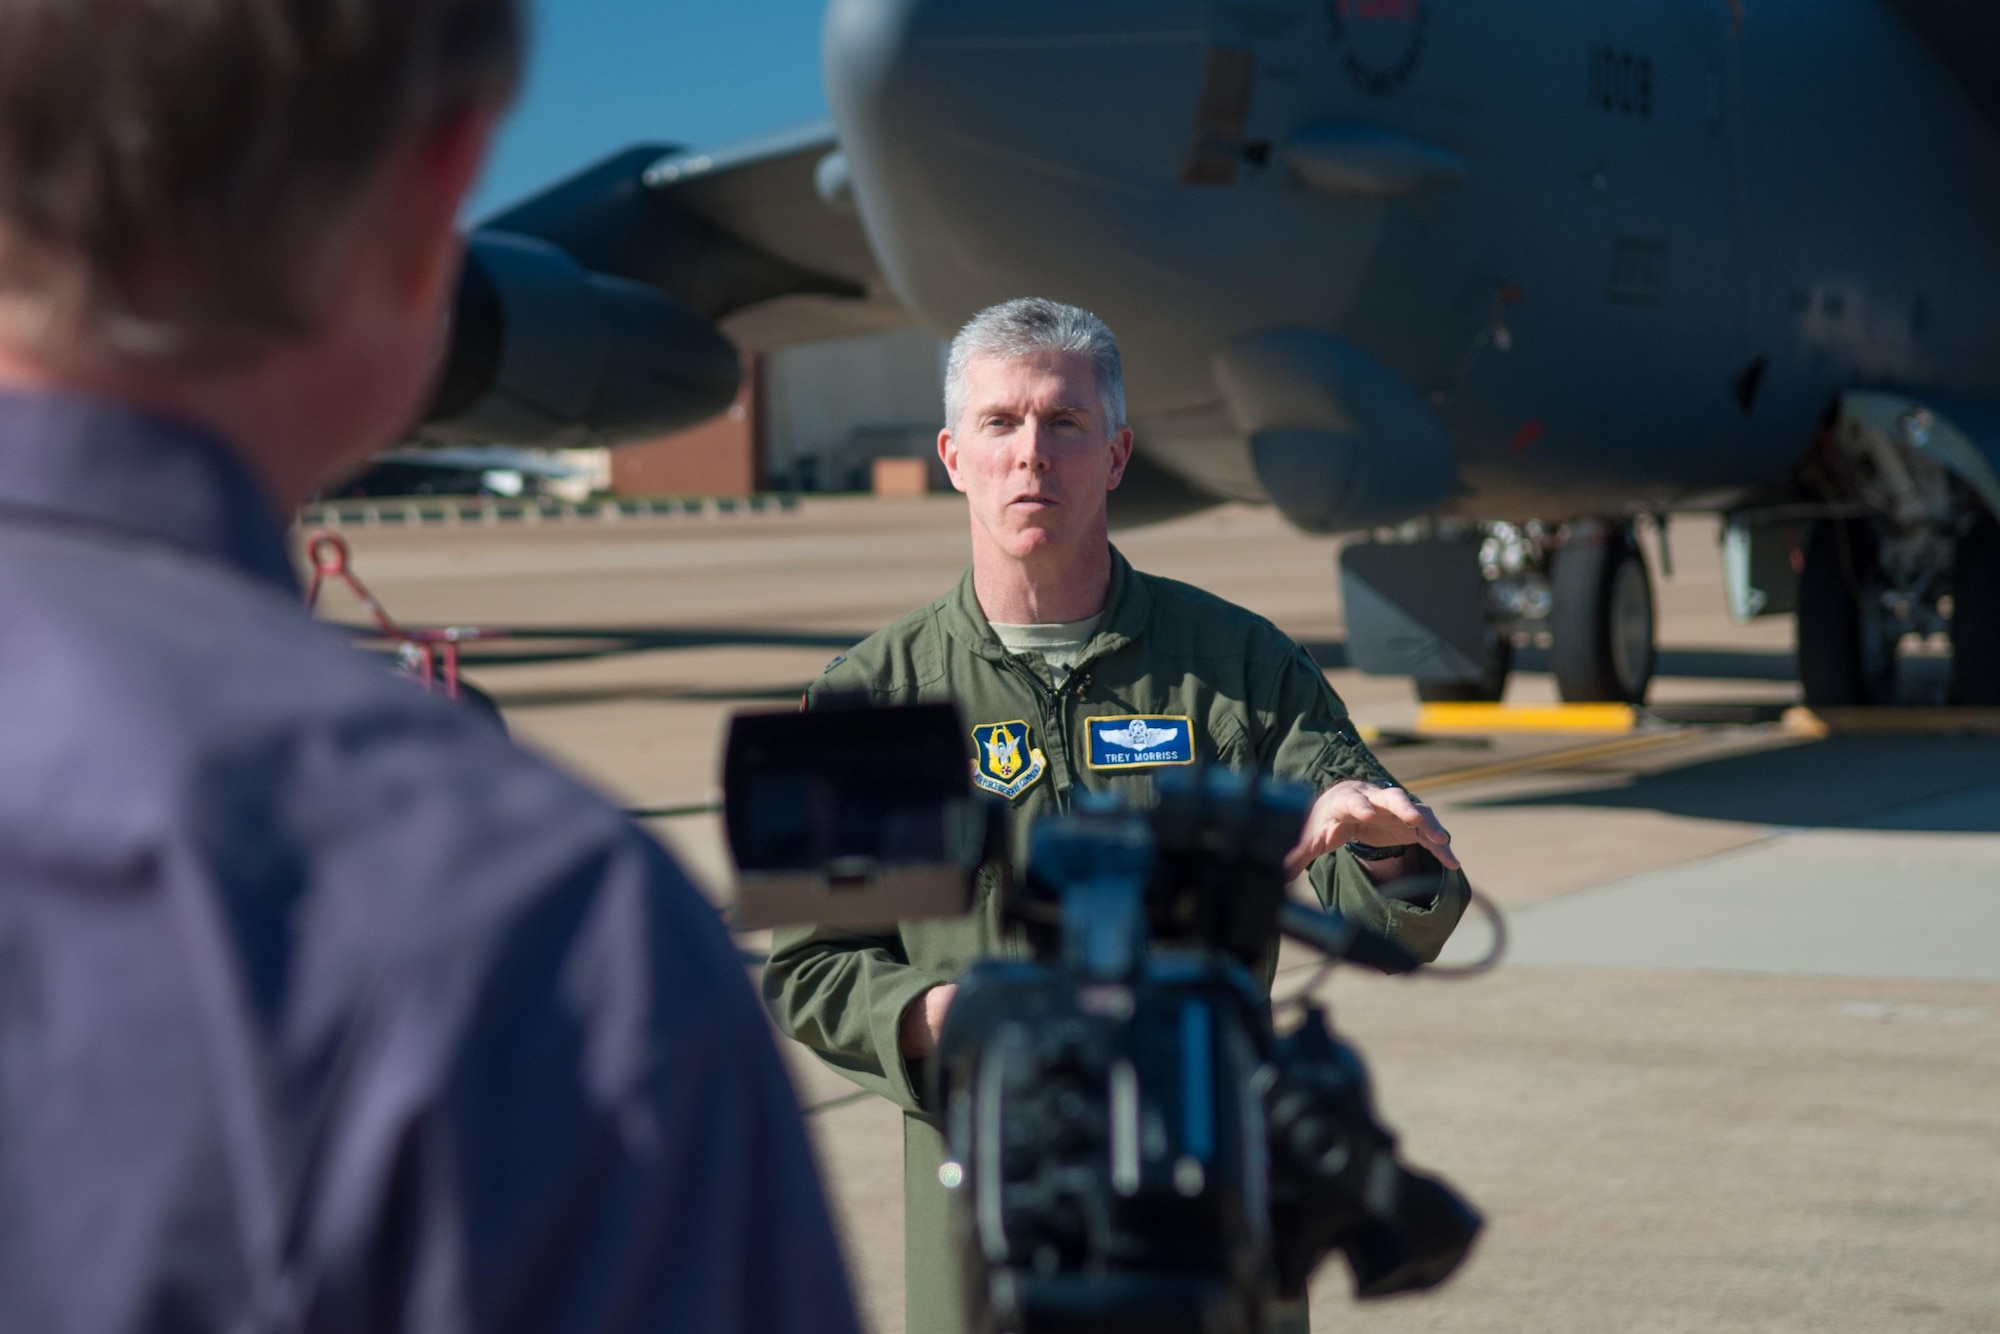 U.S. Air Force Col. Trey Morriss, the vice commander of the 307th Bomb Wing, gives an interview to the local news media on Jan. 13, 2016 on Barksdale Air Force Base, La. Morriss was an aircrew member of Operation Senior Surprise, or as it was nicknamed “Secret Squirrel,” a mission that kicked off Operation Desert Storm 25 years ago. Seven B-52G Stratofortress bombers flew for over 35 hours and 14,000 miles nonstop to complete the mission. (U.S. Air Force photo by Master Sgt. Dachelle Melville/Released)